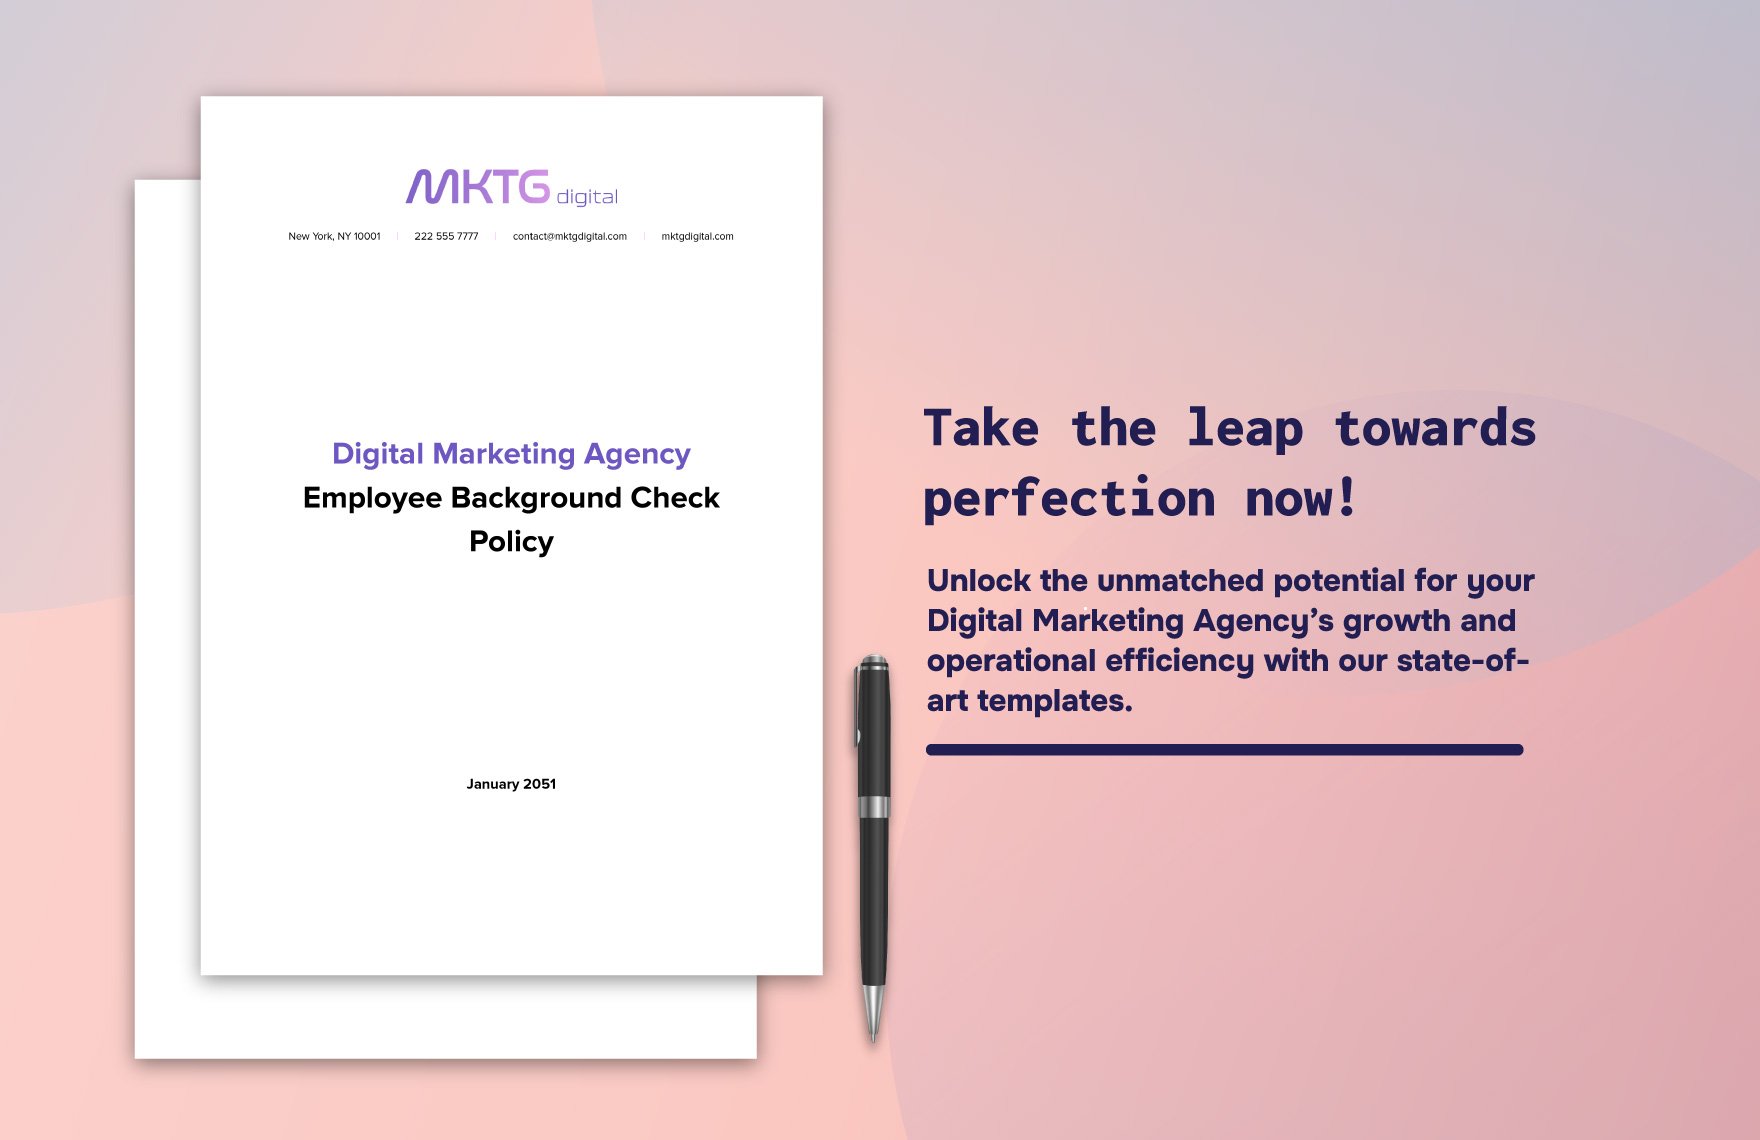 Digital Marketing Agency Employee Background Check Policy HR Template